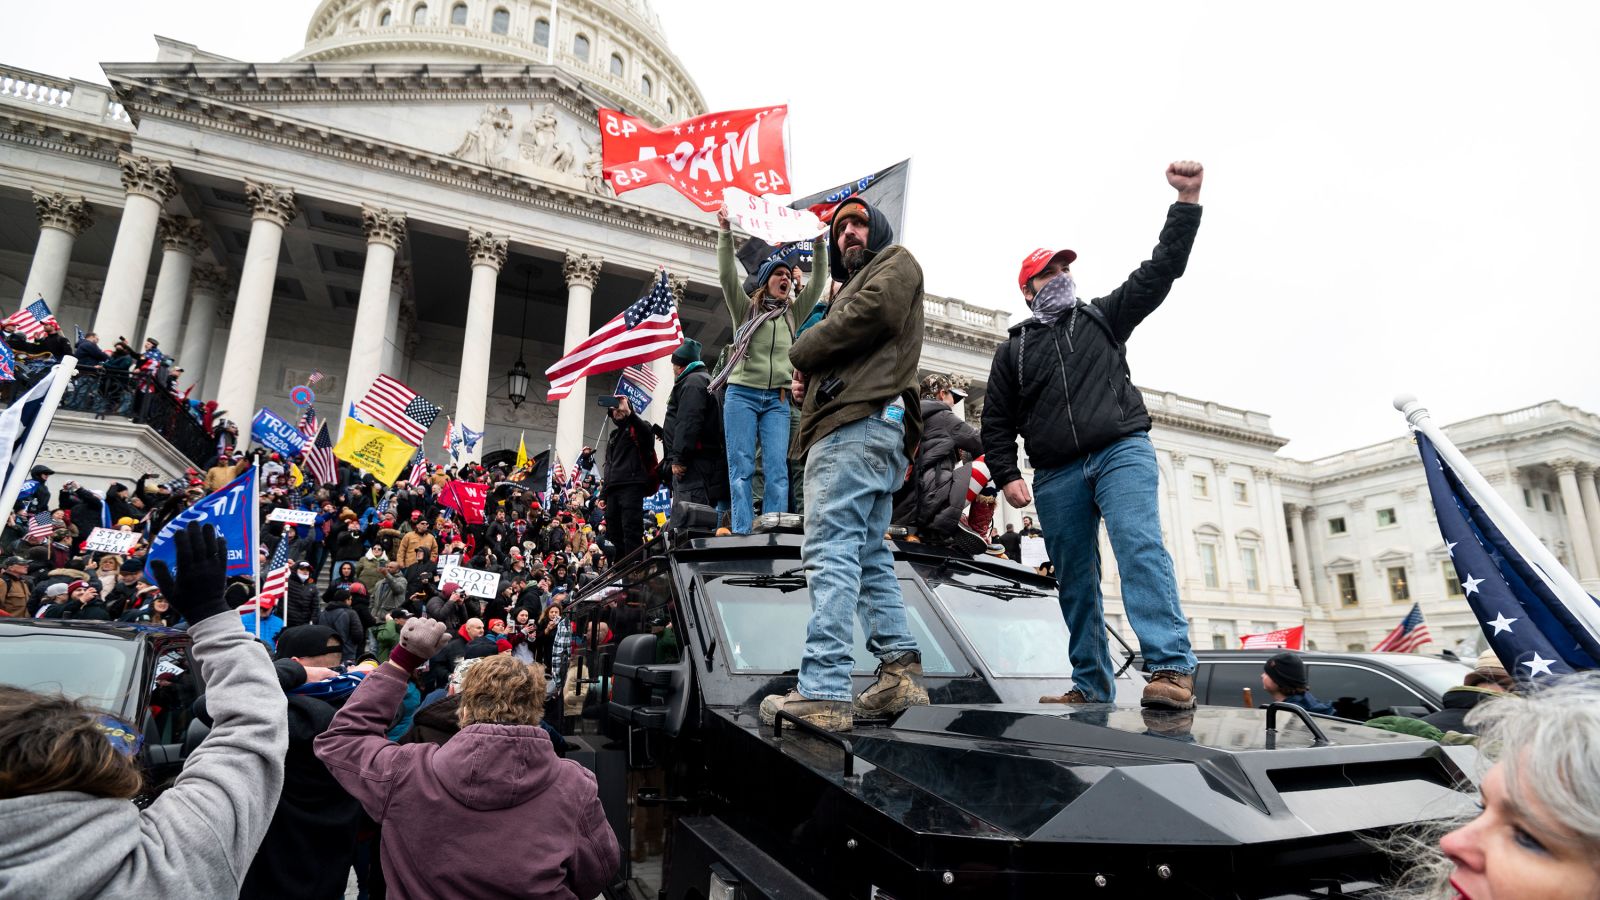 They call the January 6, 2021 protest an insurrection to attempt to deny Republicans elected office